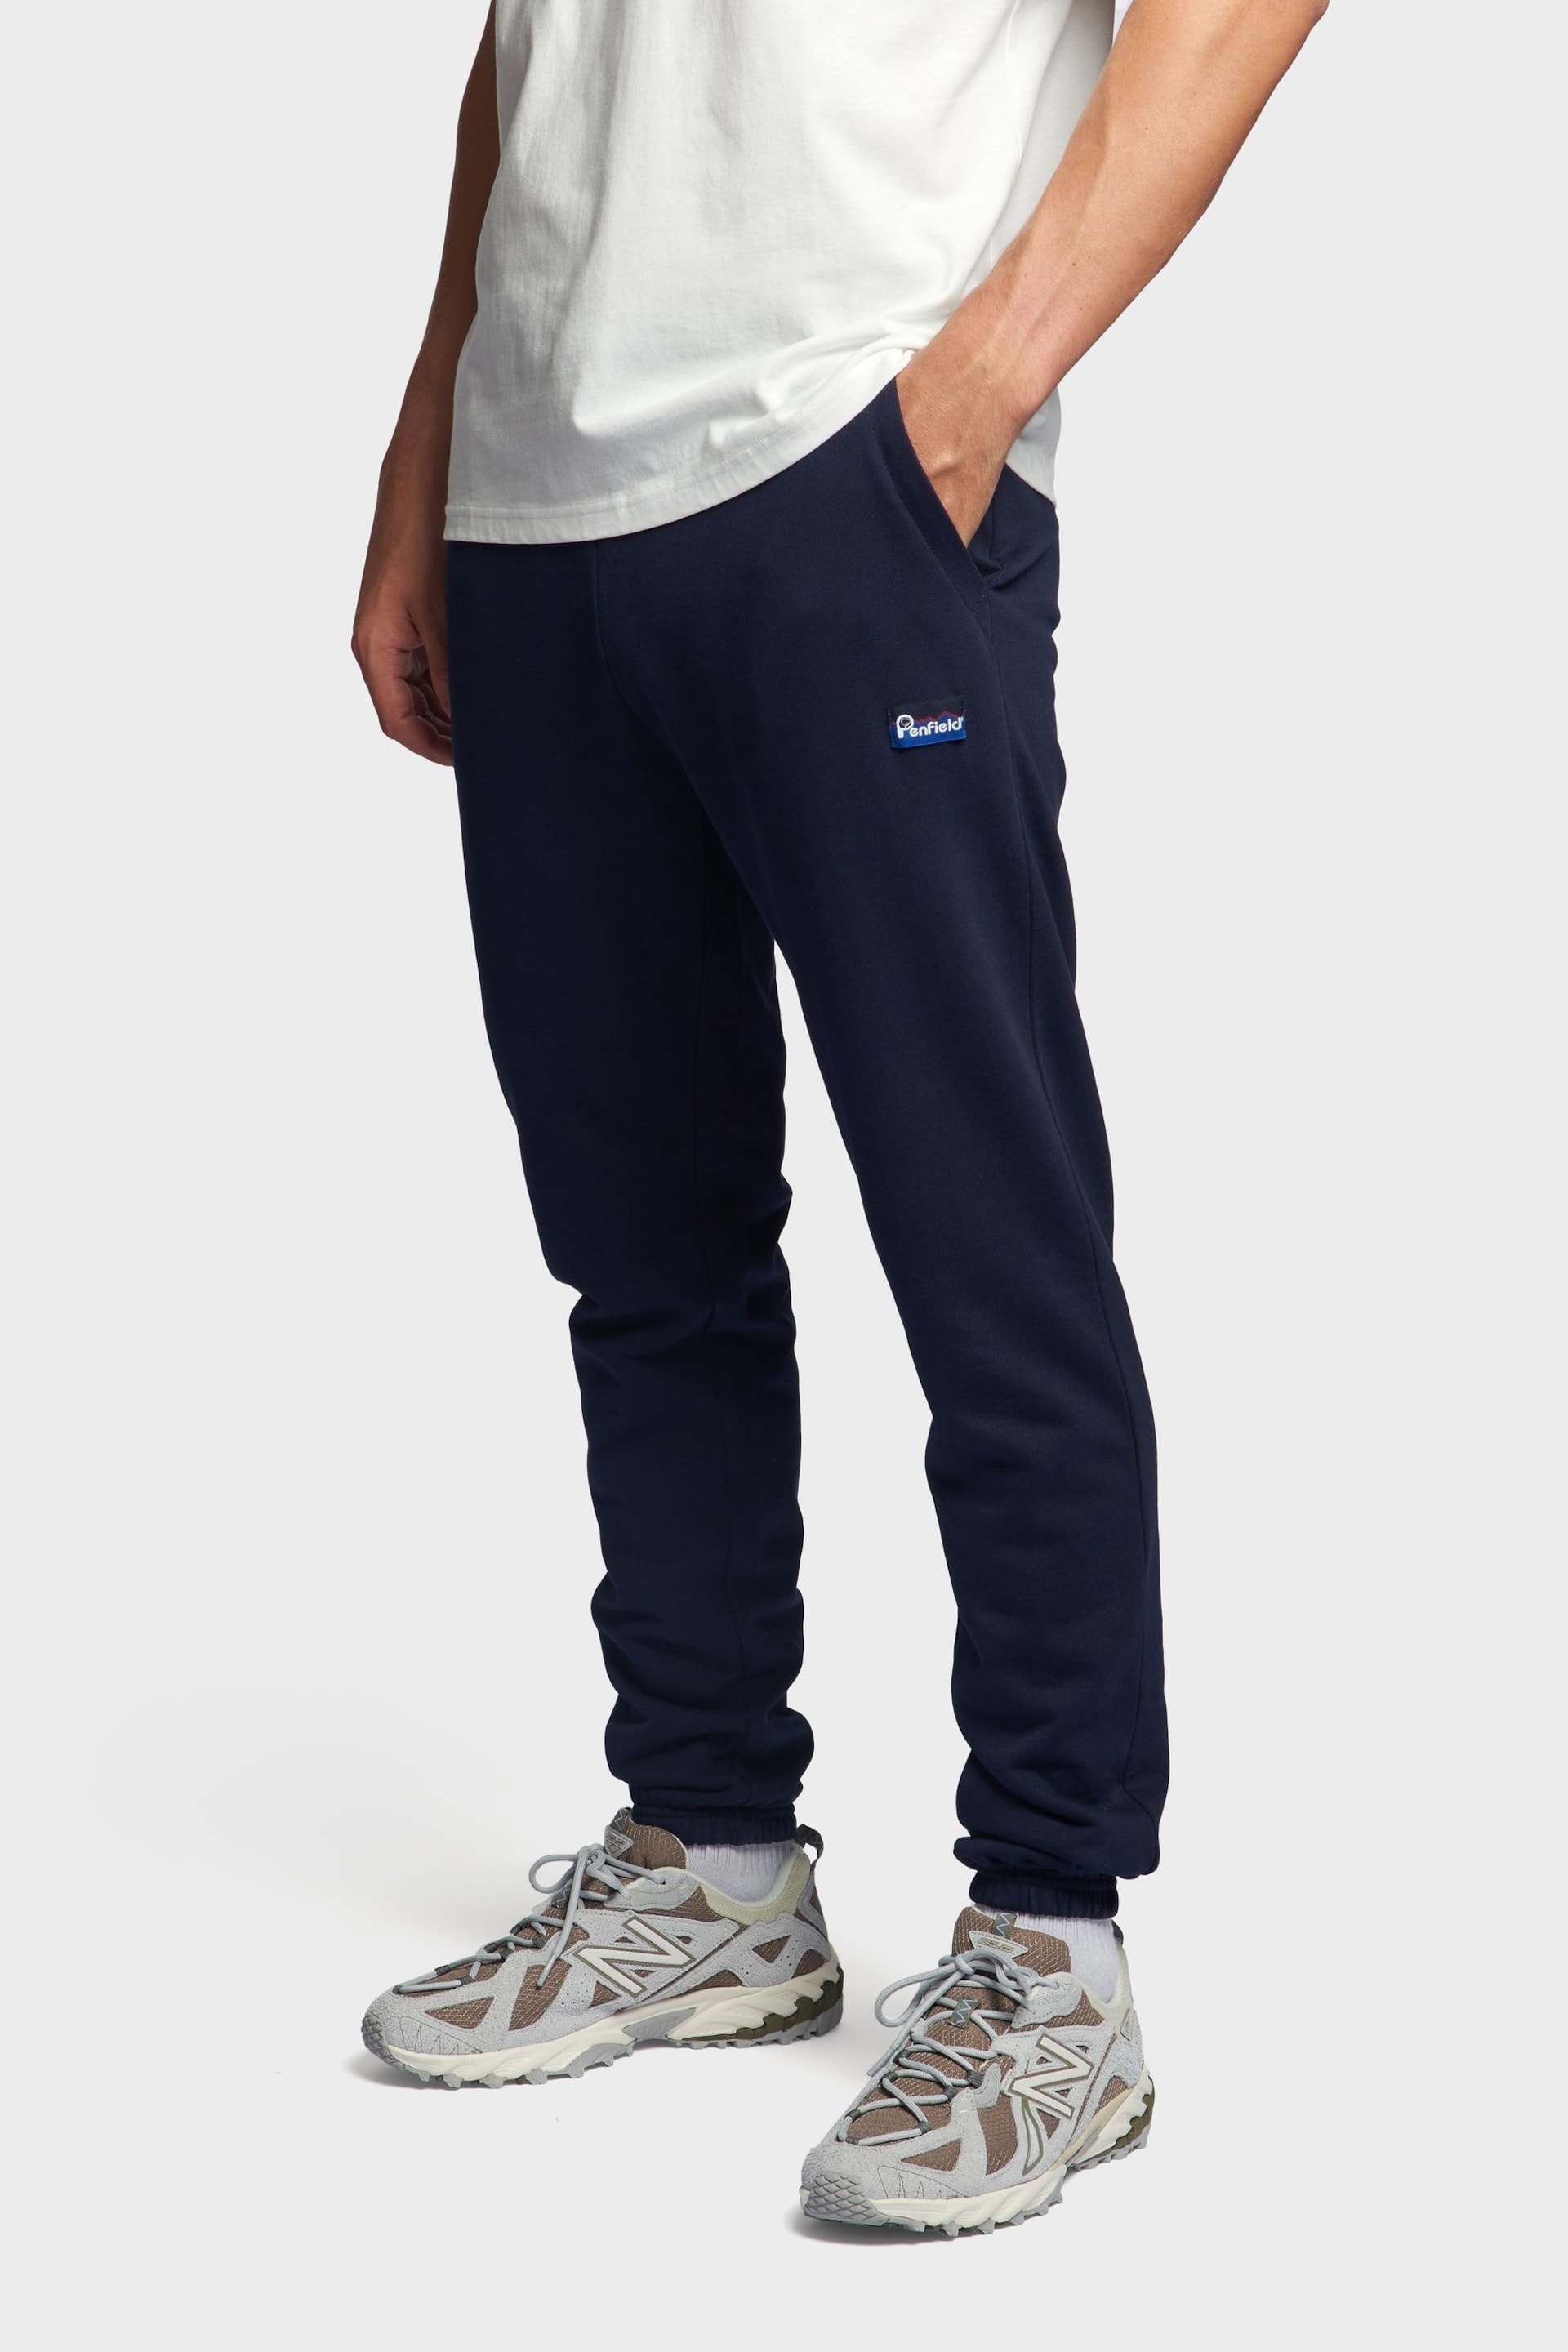 Penfield Mens Relaxed Fit Original Logo Joggers - Image 1 of 5